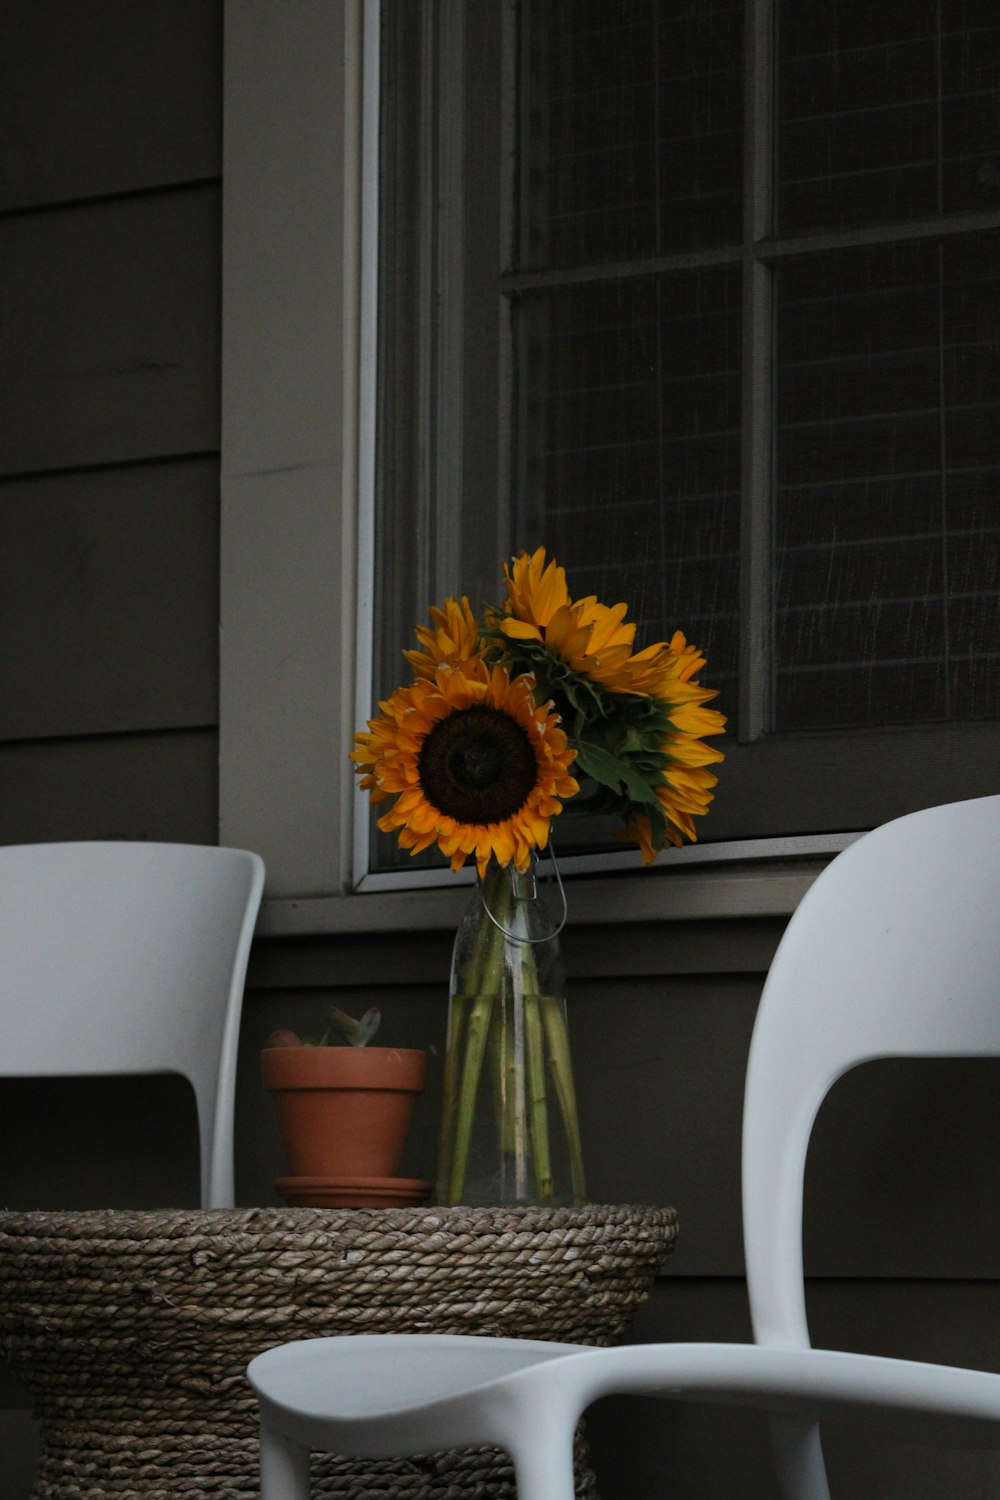 a vase of sunflowers sitting on a table in front of a window